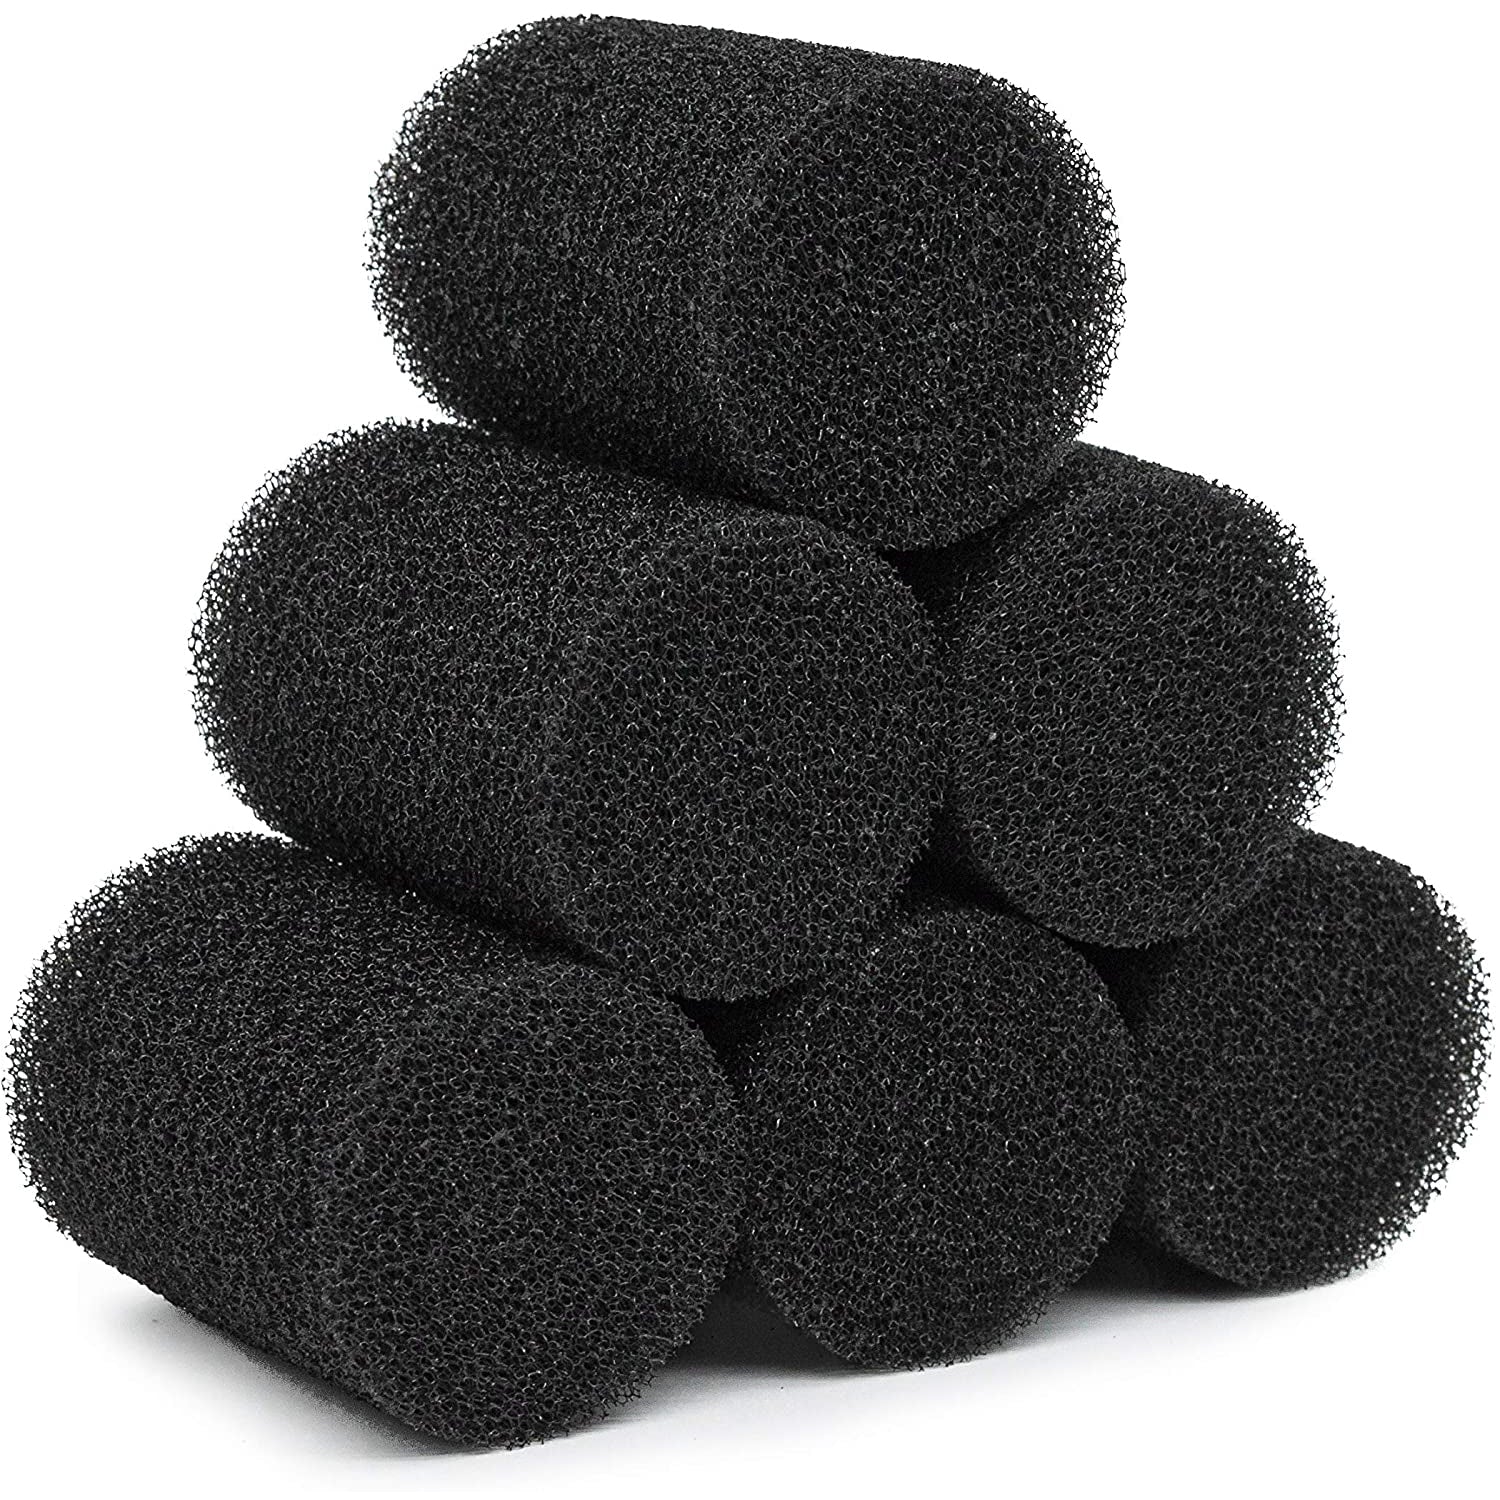 LTWHOME Coarse Prefilter Sponge Fit for Maxi Jet and Most Aquariums Pumps (Pack of 6)